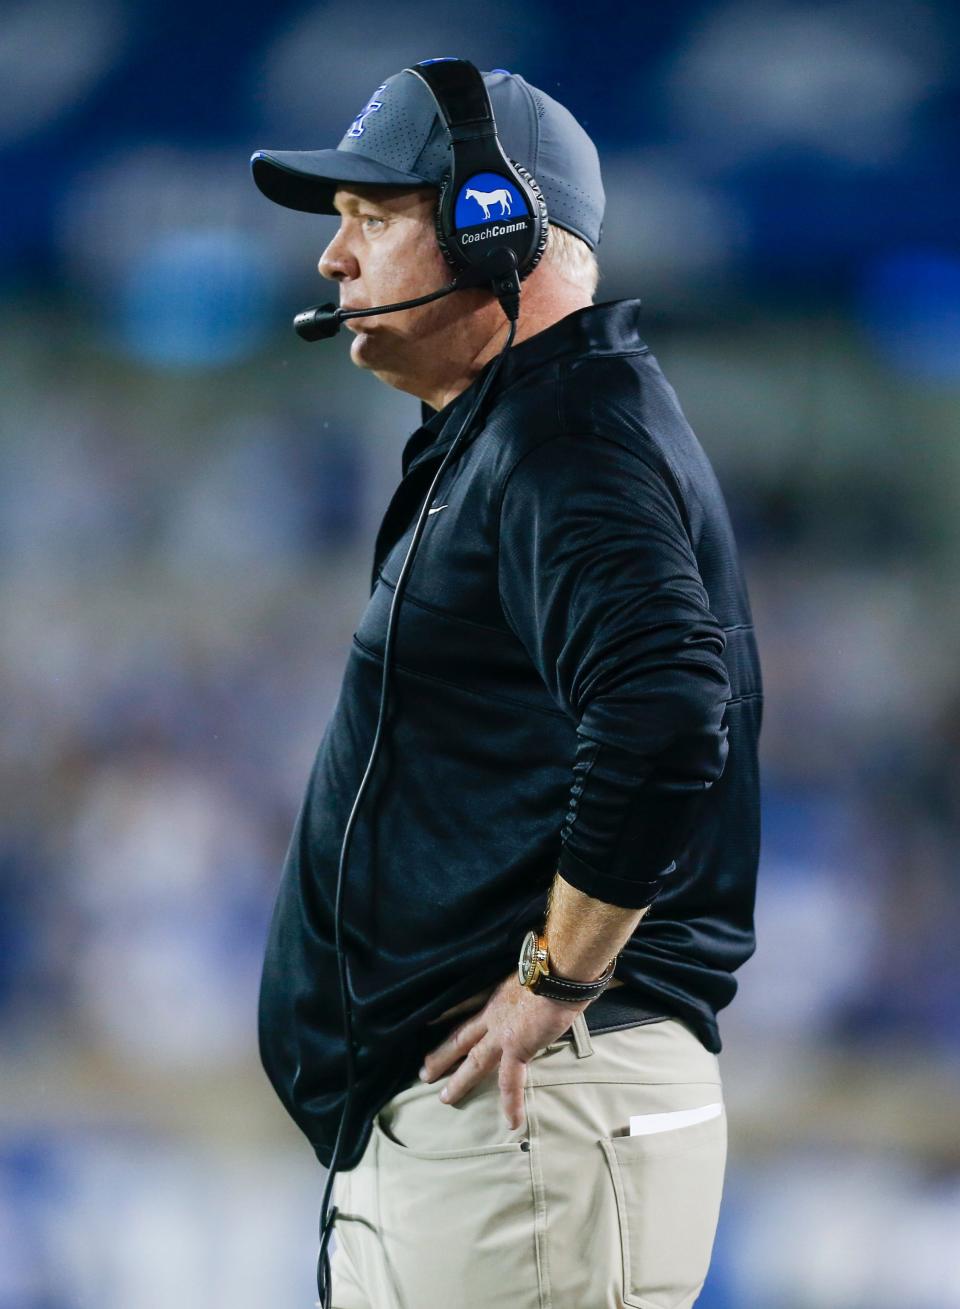 Mark Stoops and the Kentucky football team will face a tough road the rest of this season.